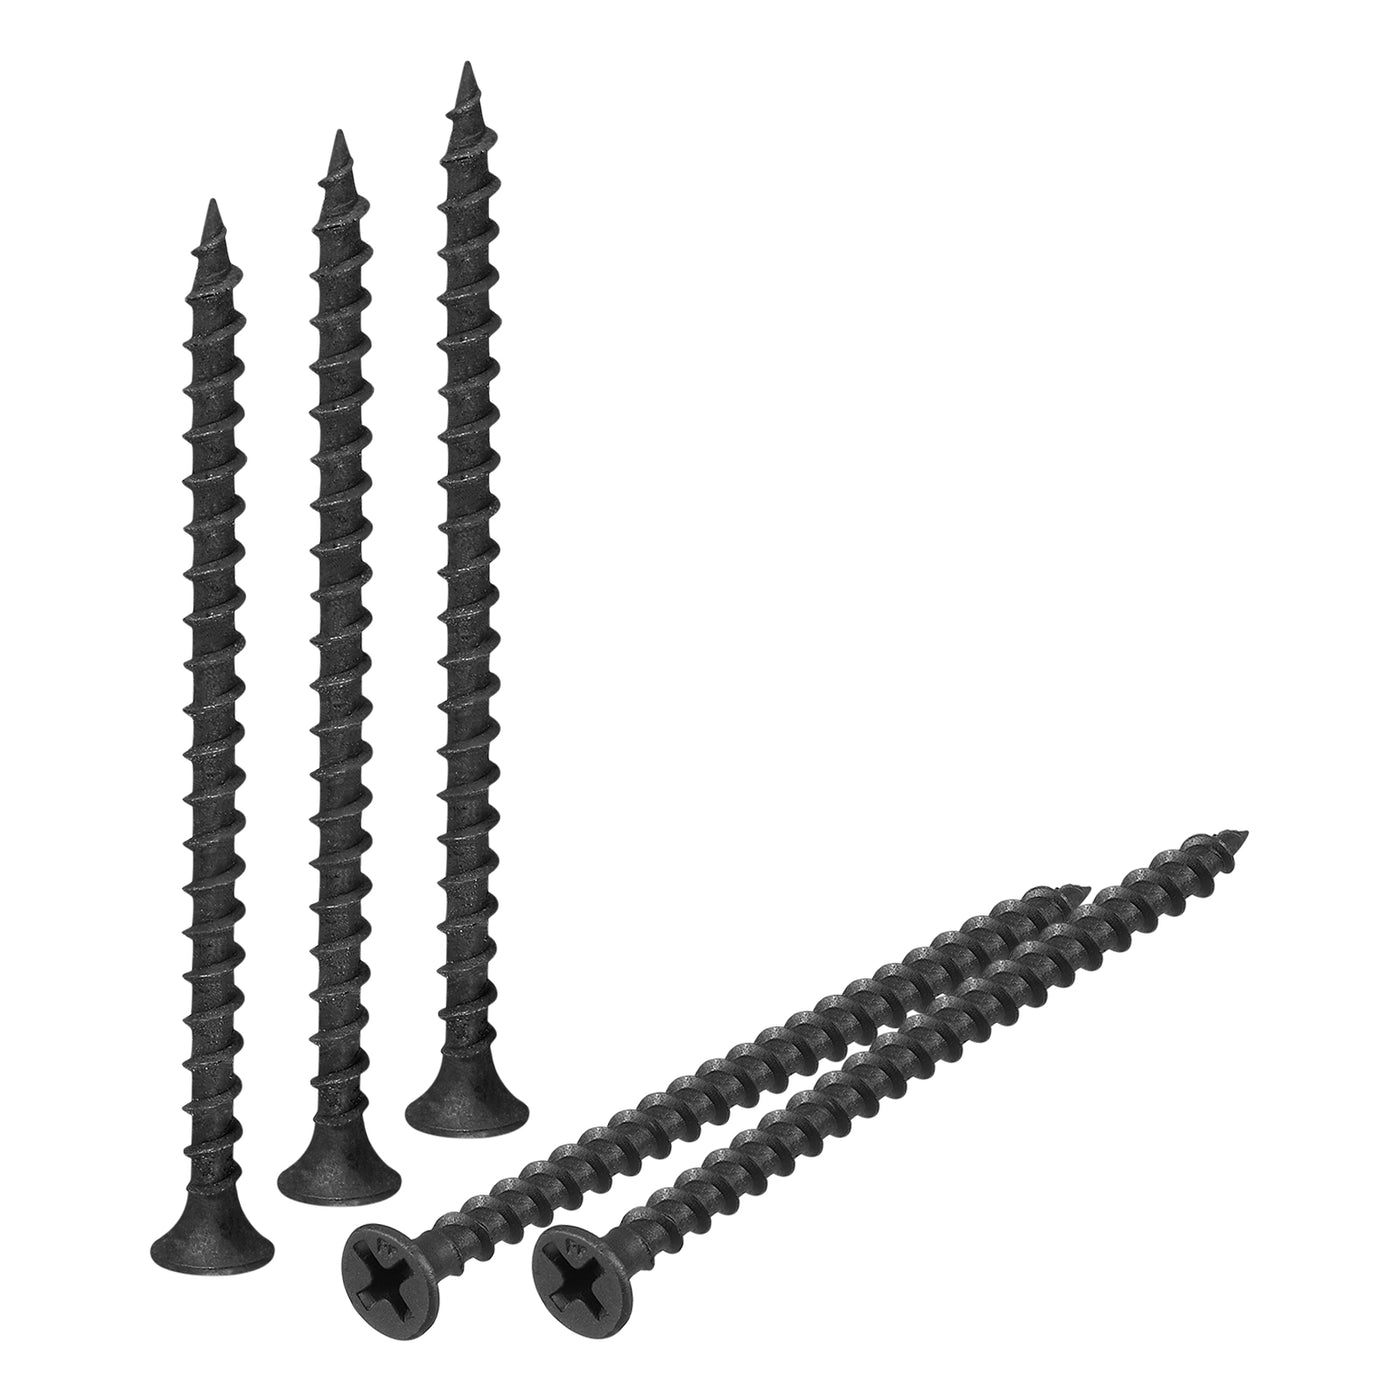 uxcell Uxcell M3.8x70mm 50pcs Phillips Drive Wood Screws, Carbon Steel Self Tapping Screws